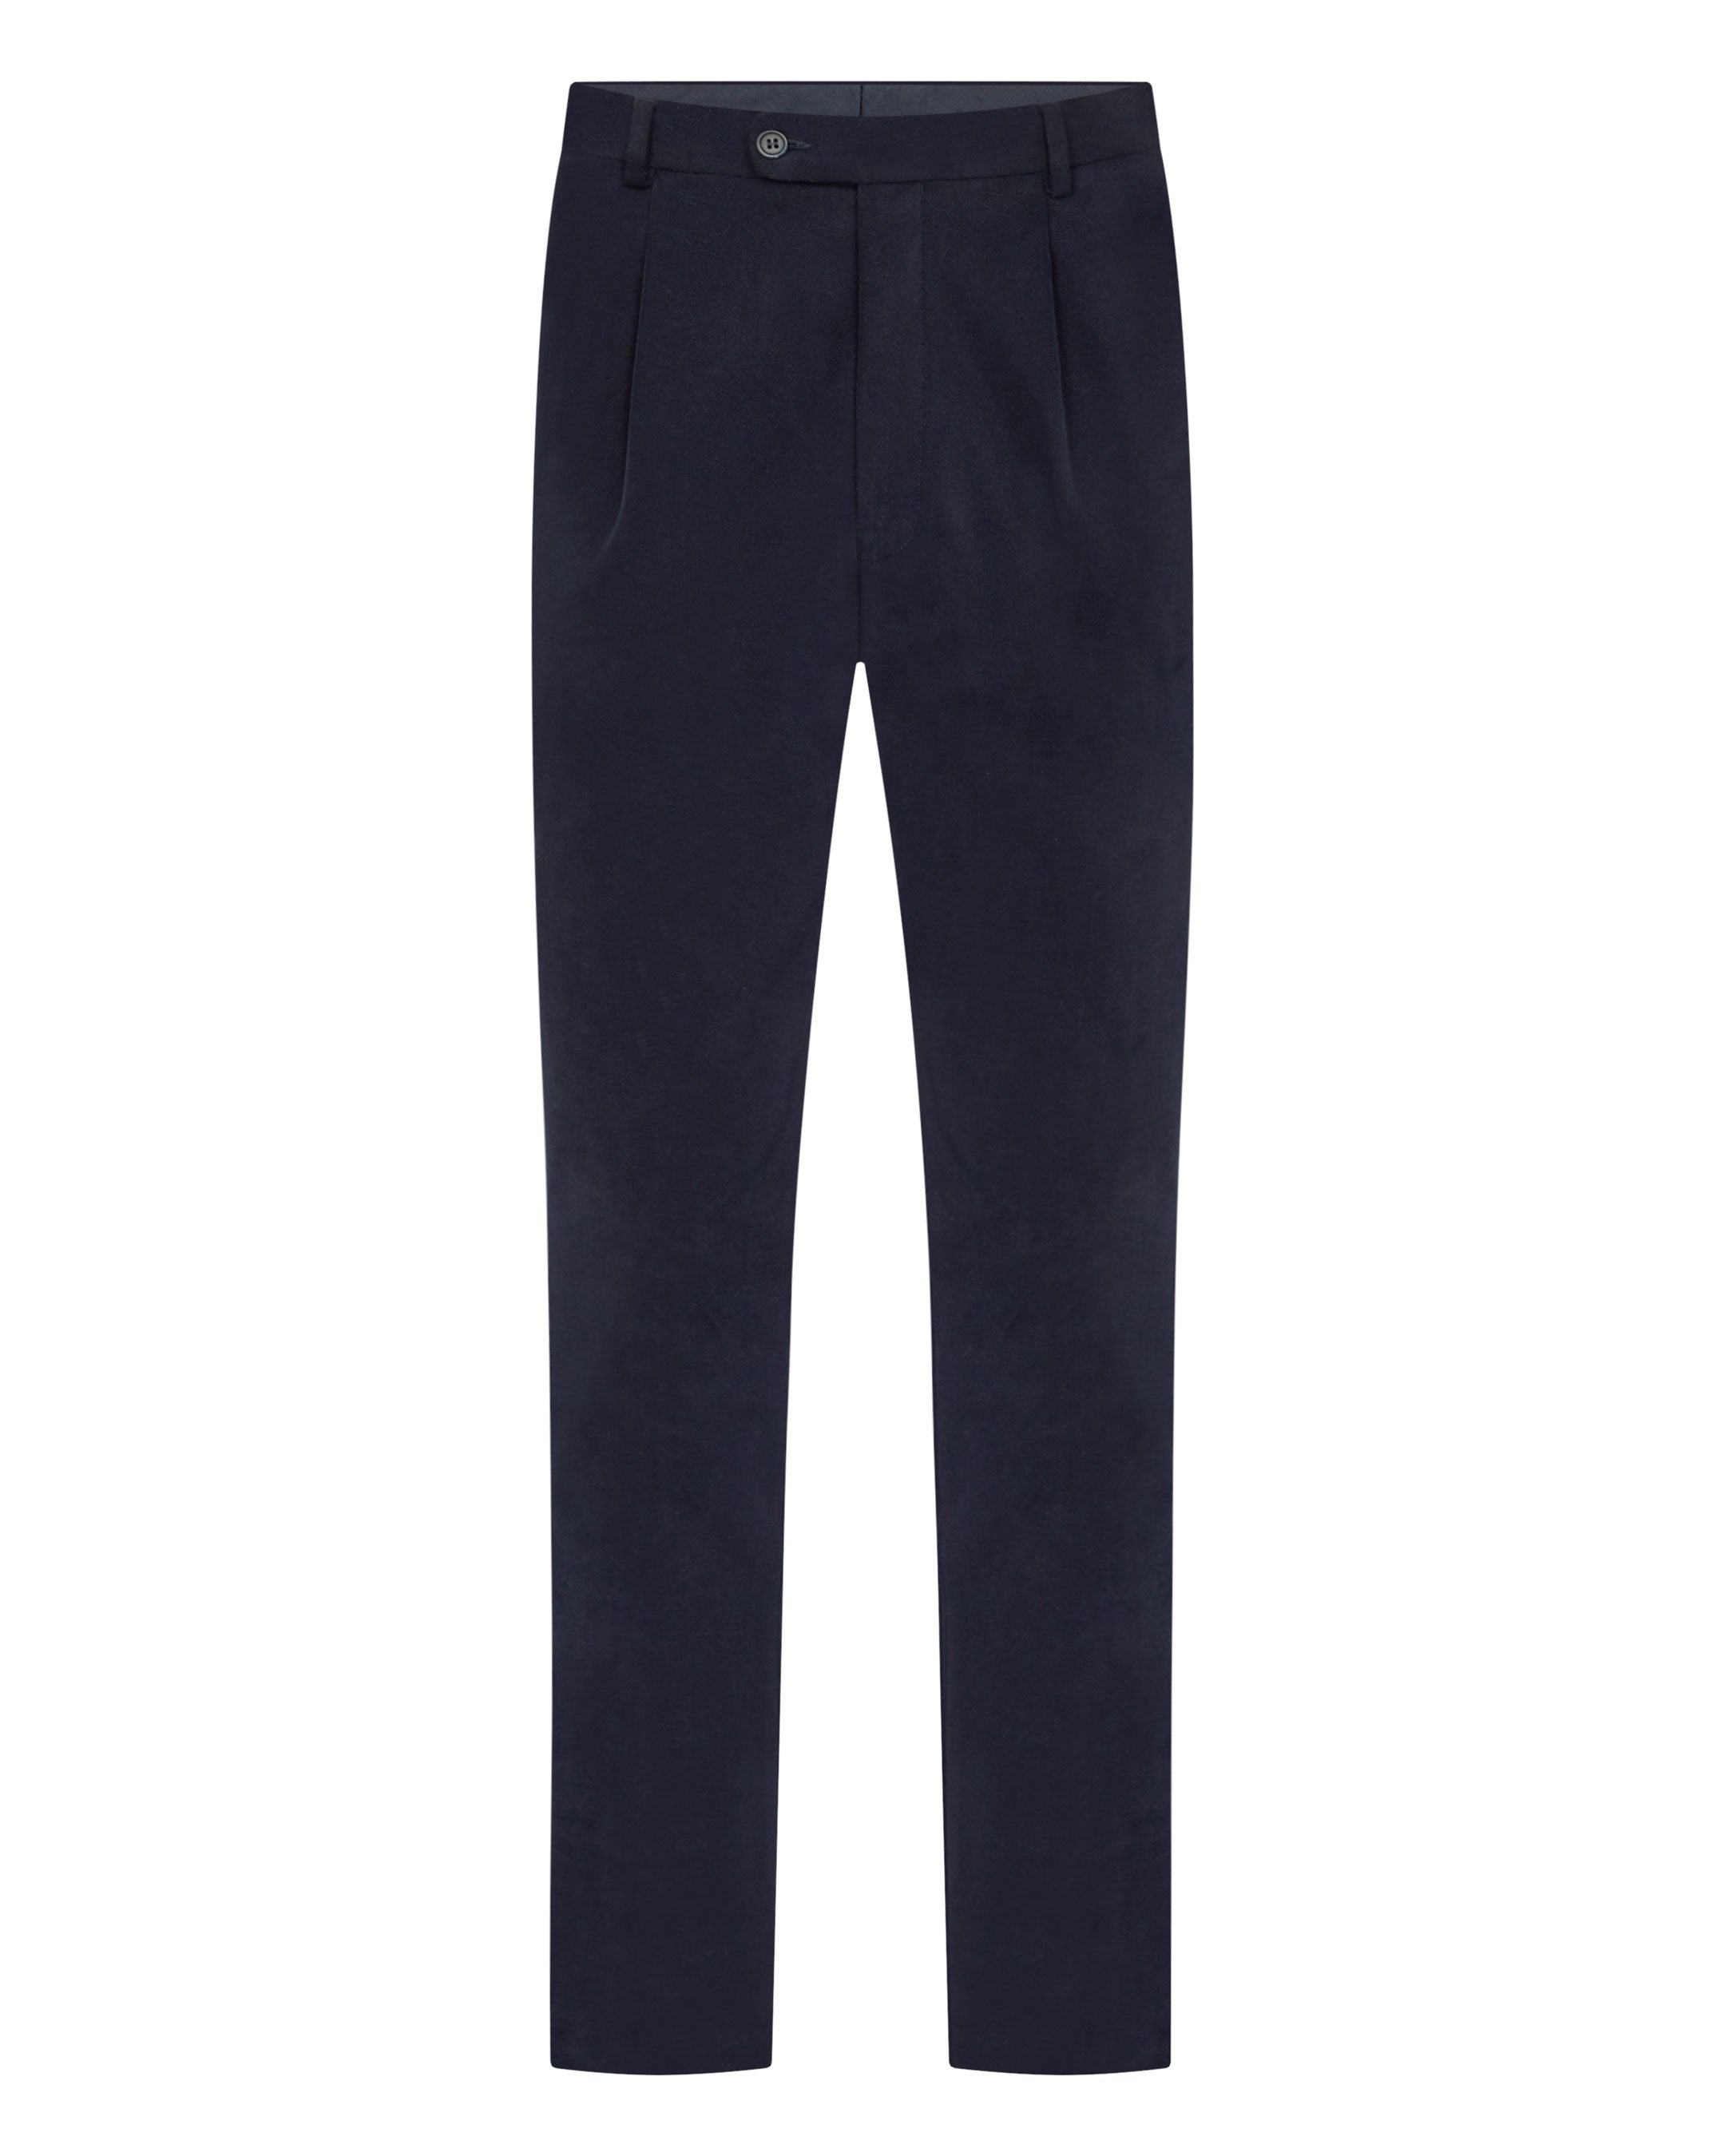 Buy Men's Cotton Mercerised Solid Navy Trousers | Cotstyle